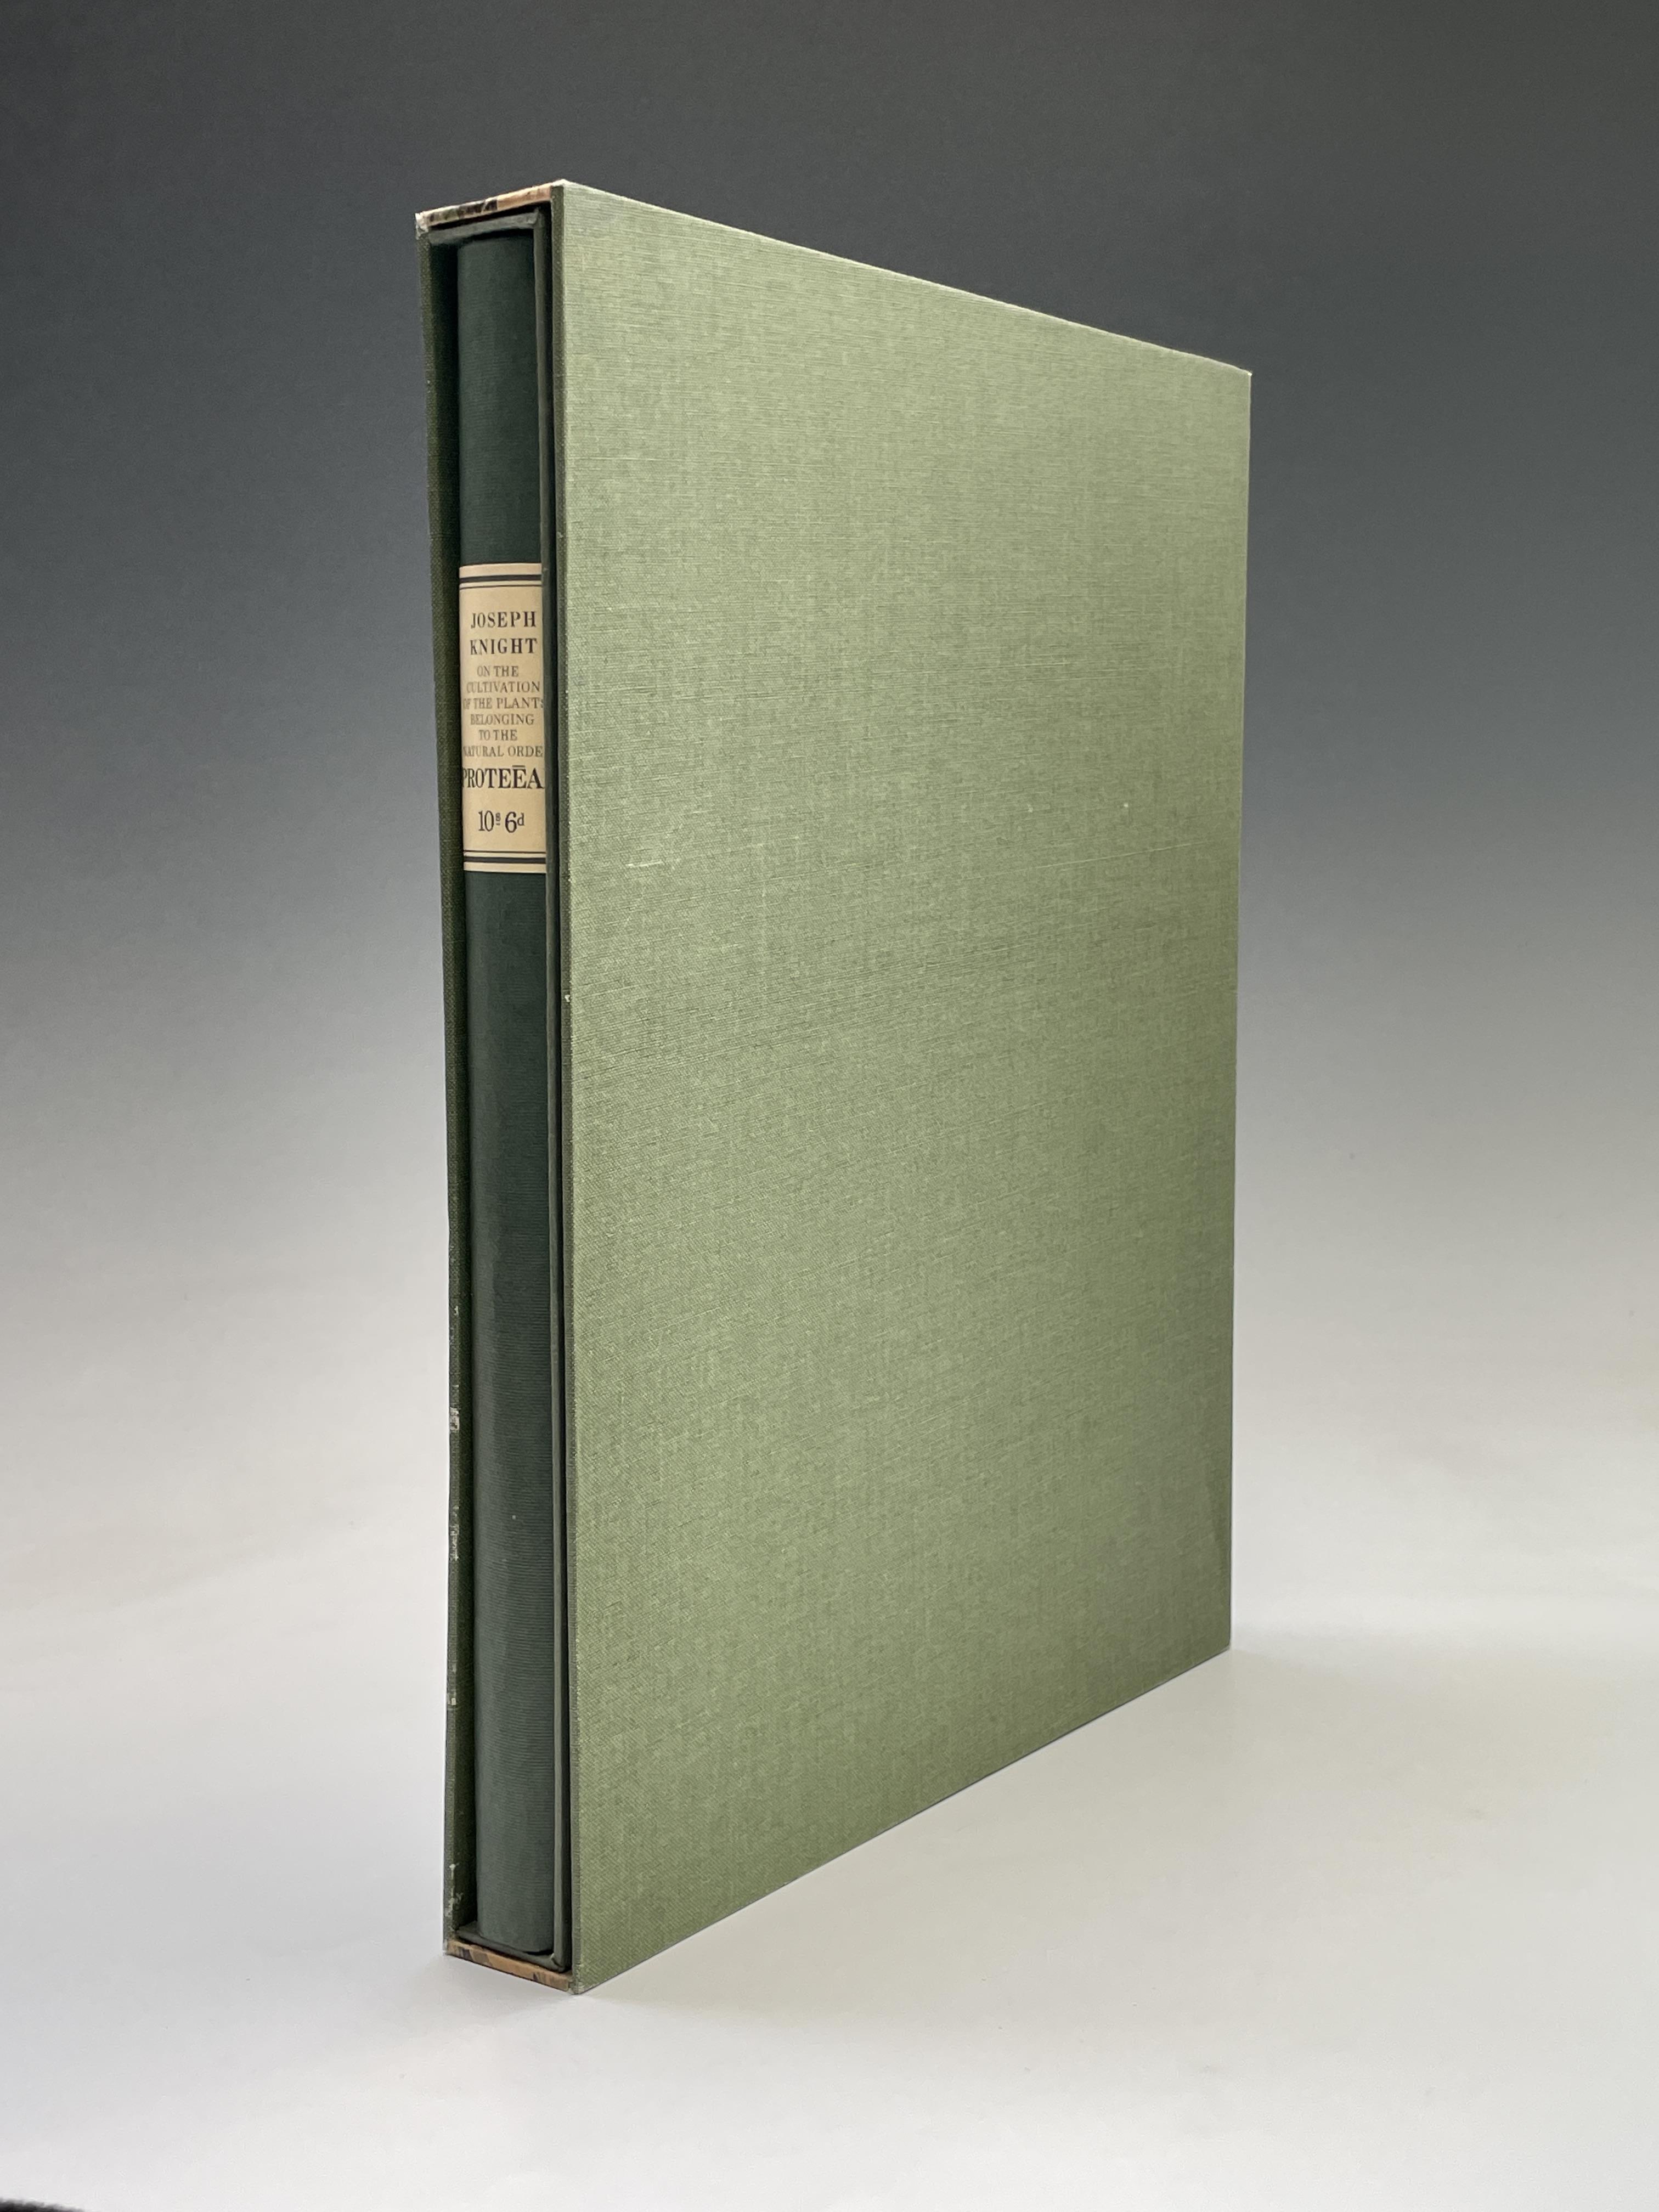 JOSEPH KNIGHT F.H.S, 'Horticultural Essays On The Natural Order Of Proteeae', hardback with - Image 6 of 26